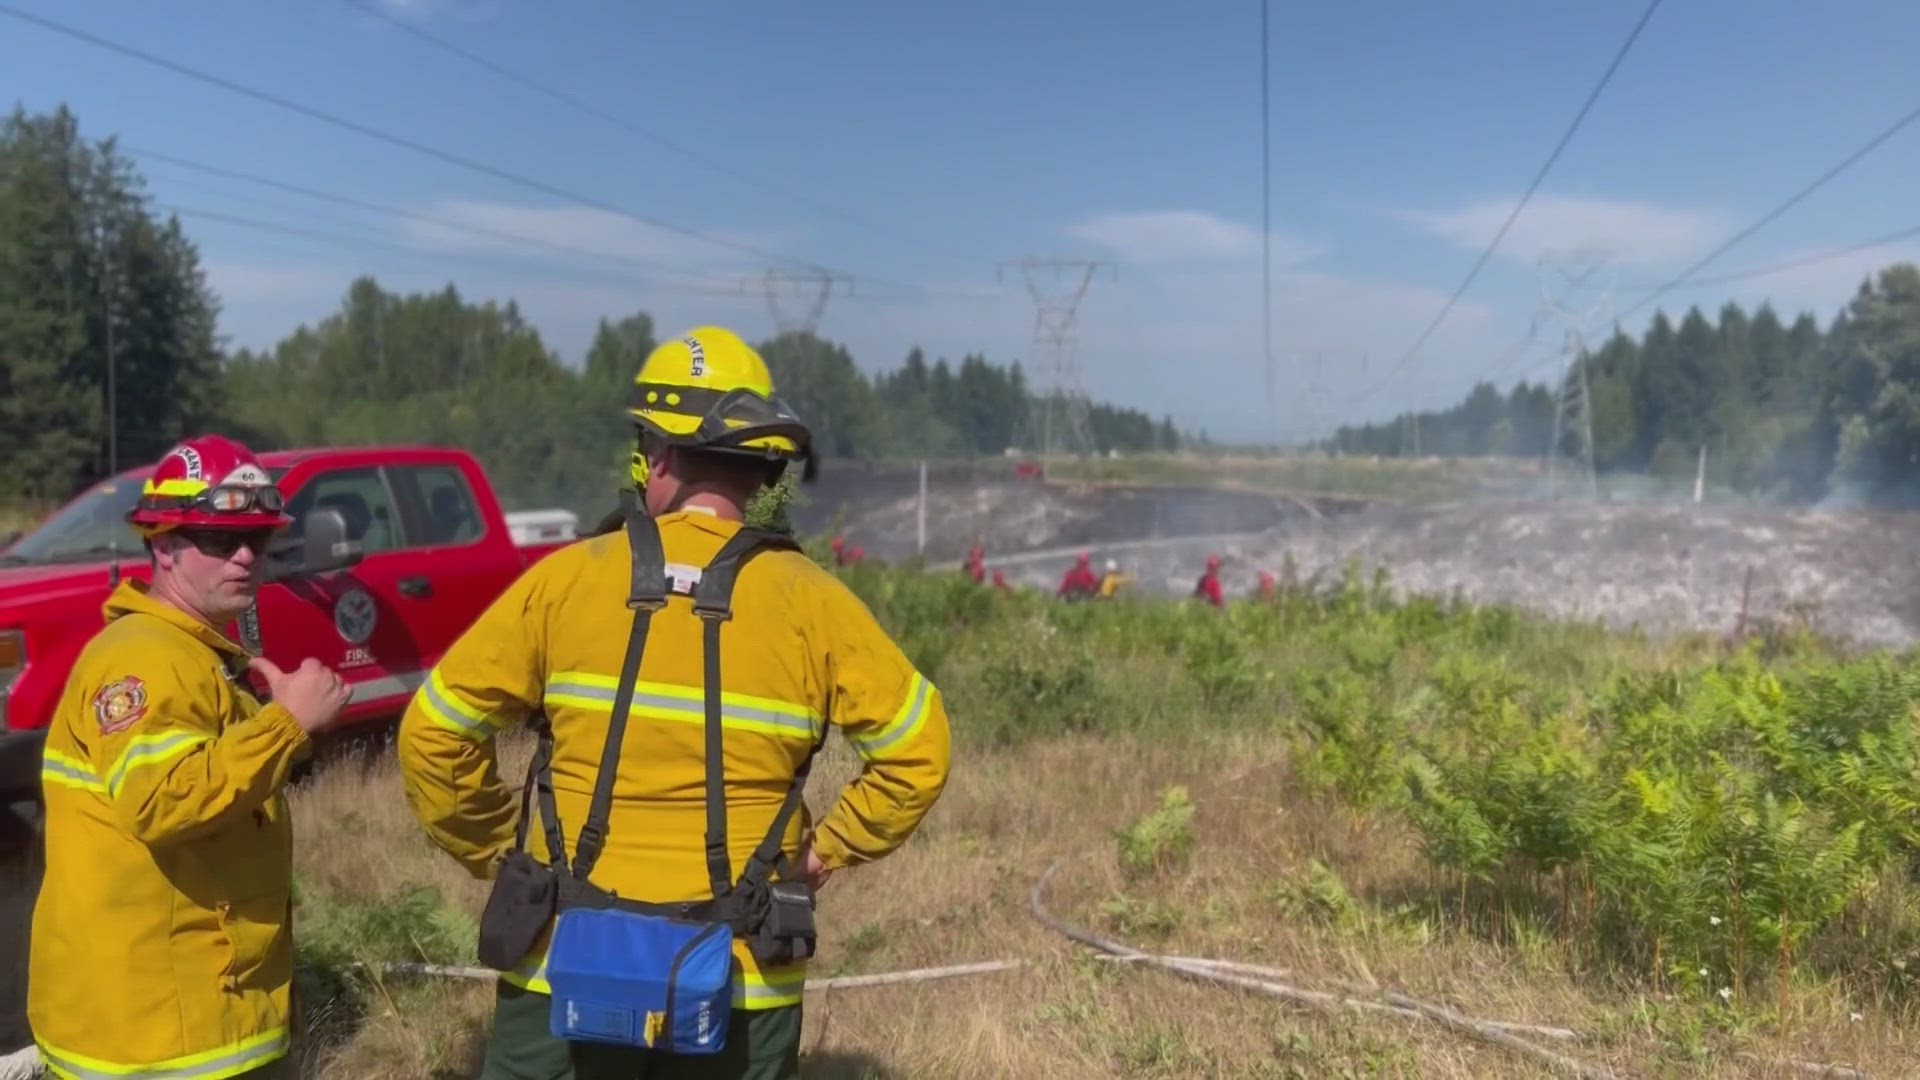 As a precaution, electricity was shut to approximately 500 homes from Maple Valley to Olympia.